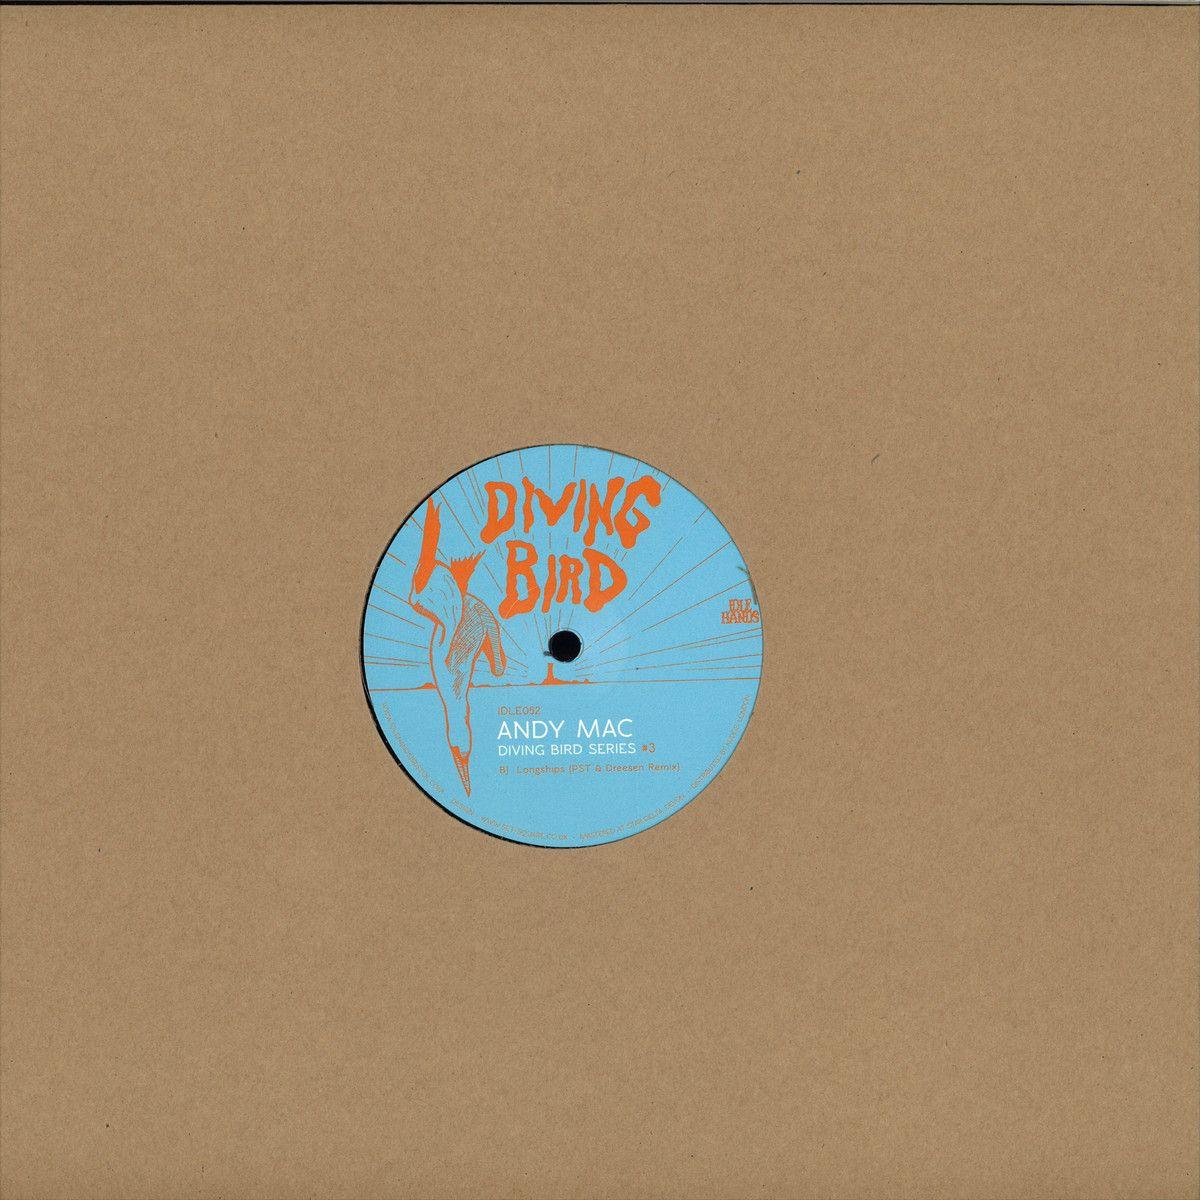 Diving Bird in Circle Logo - Andy Mac - Diving Bird 3 / Idle Hands IDLE052 - Vinyl